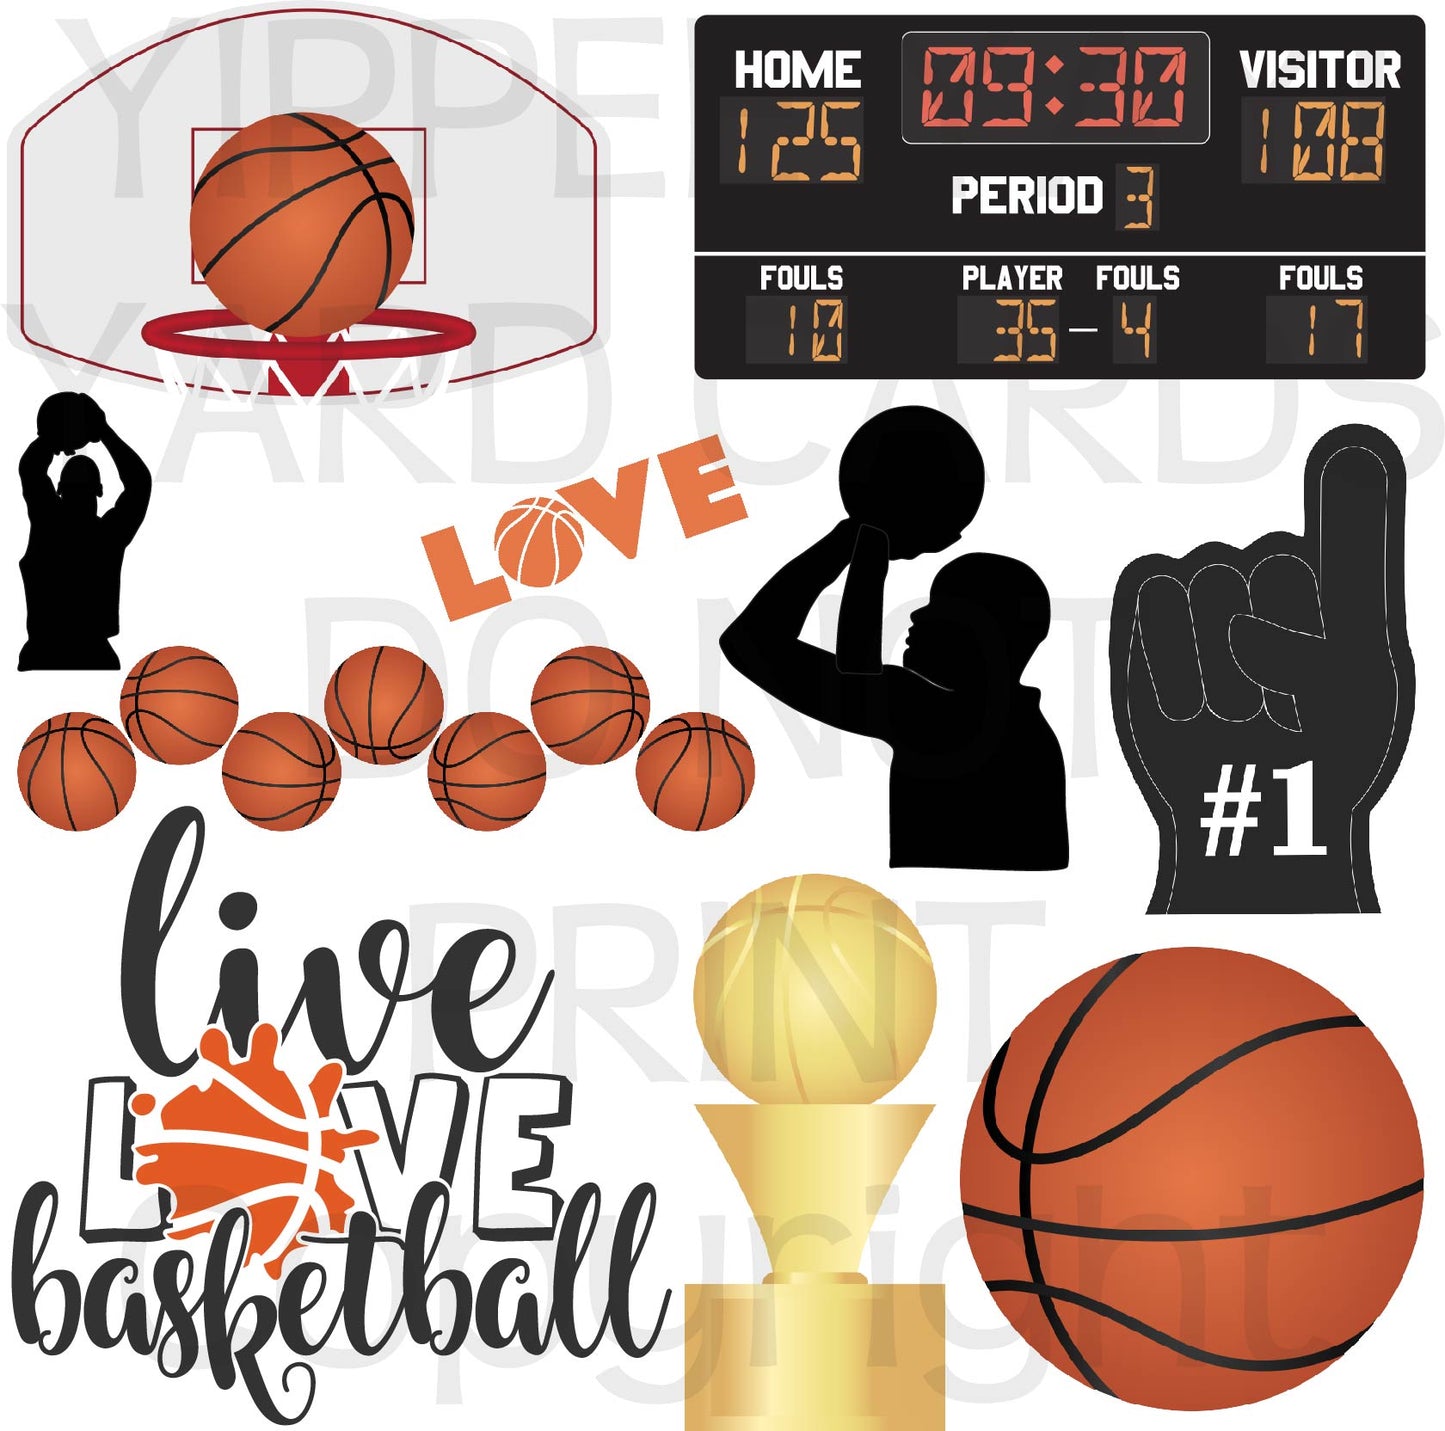 Basketball - Half Sheet Misc. (Must Purchase 2 Half sheets - You Can Mix & Match)